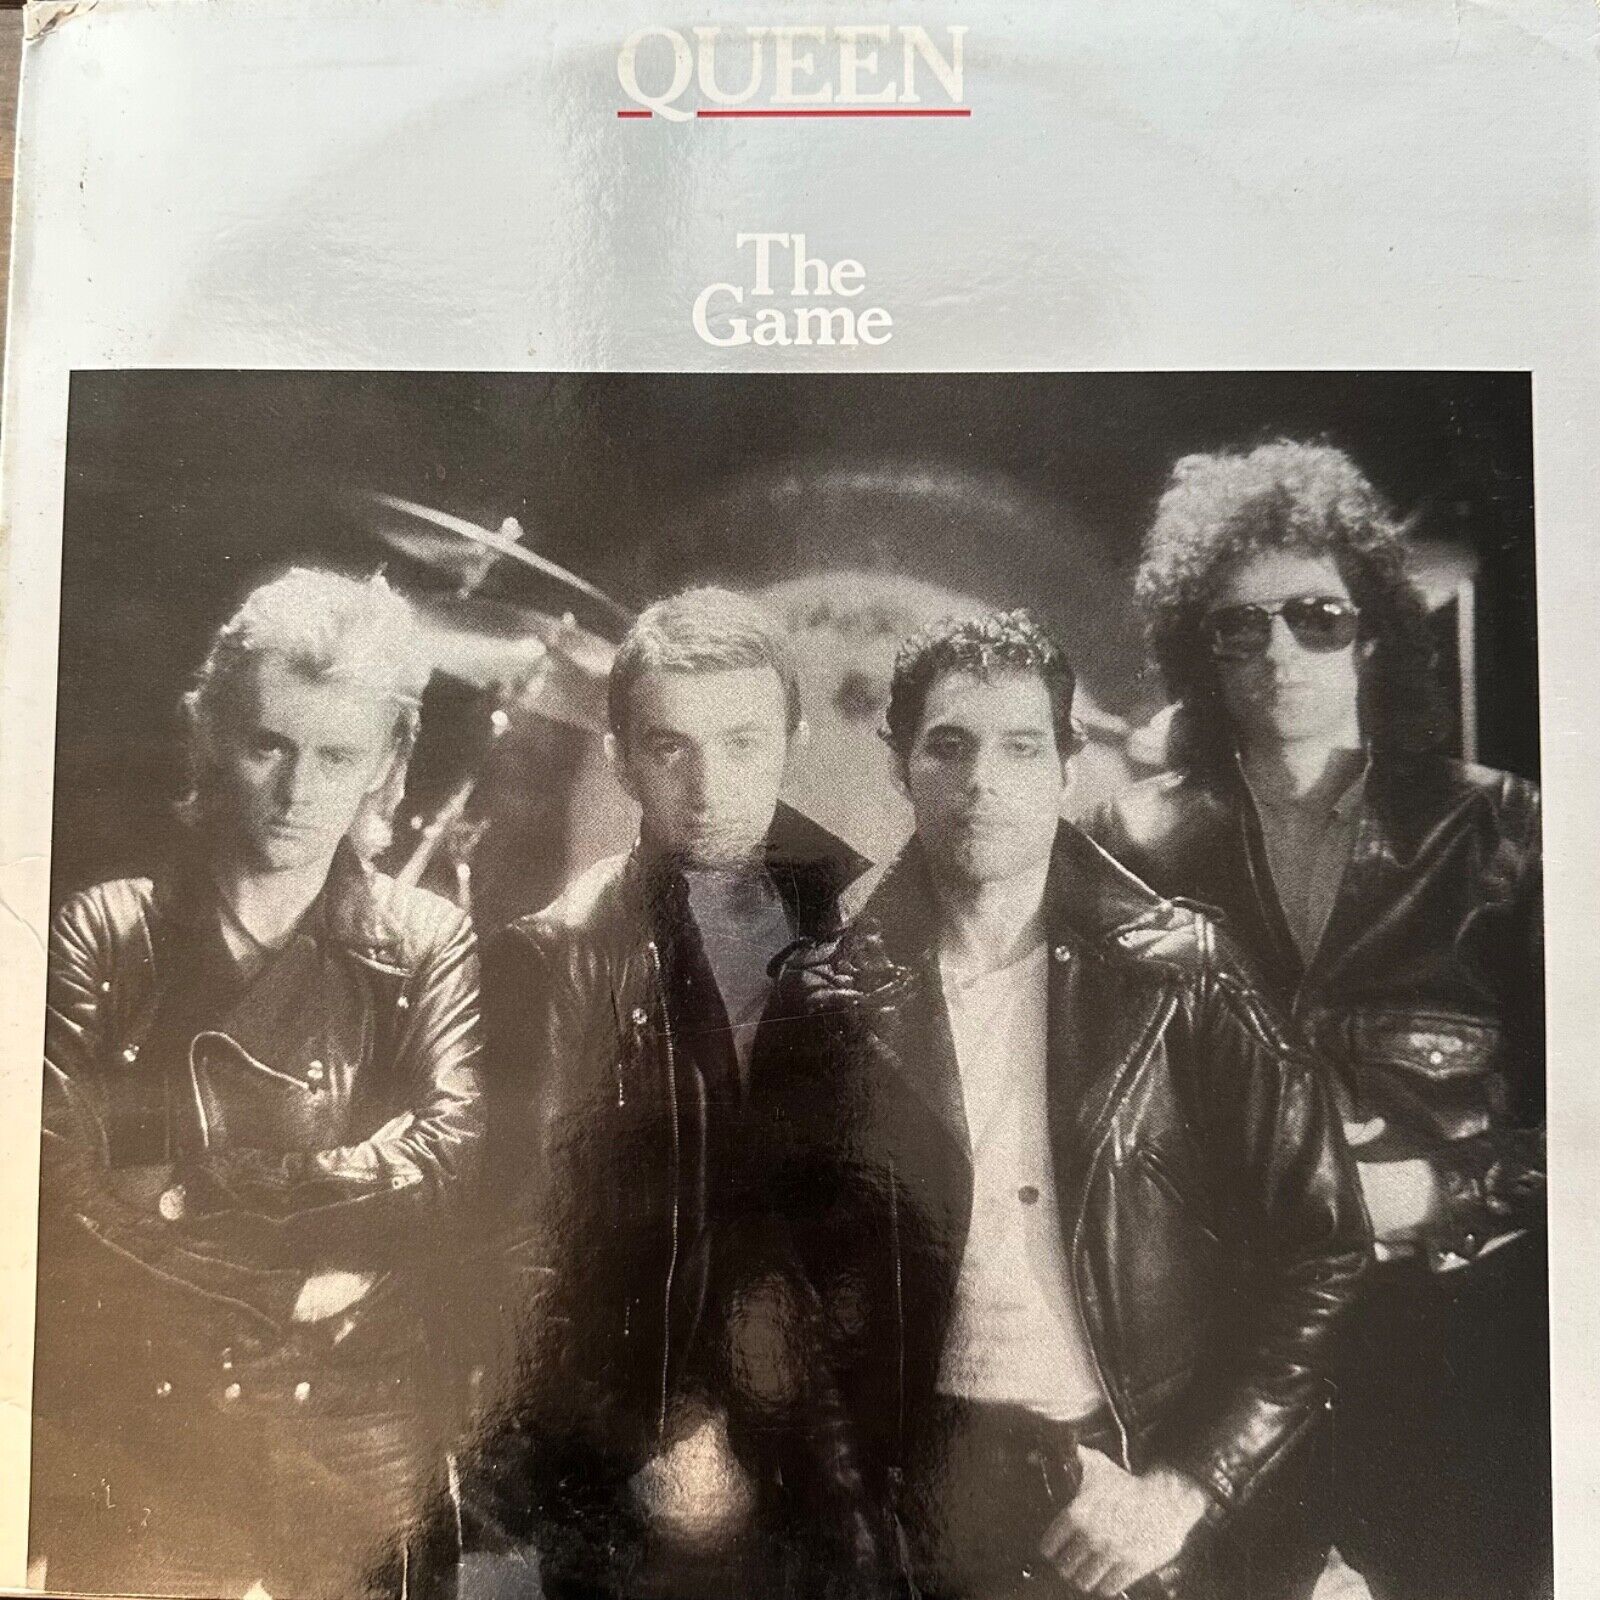 Queen - The Game LP Elektra 5E-513B SP (1980) White Label Foil Sleeve